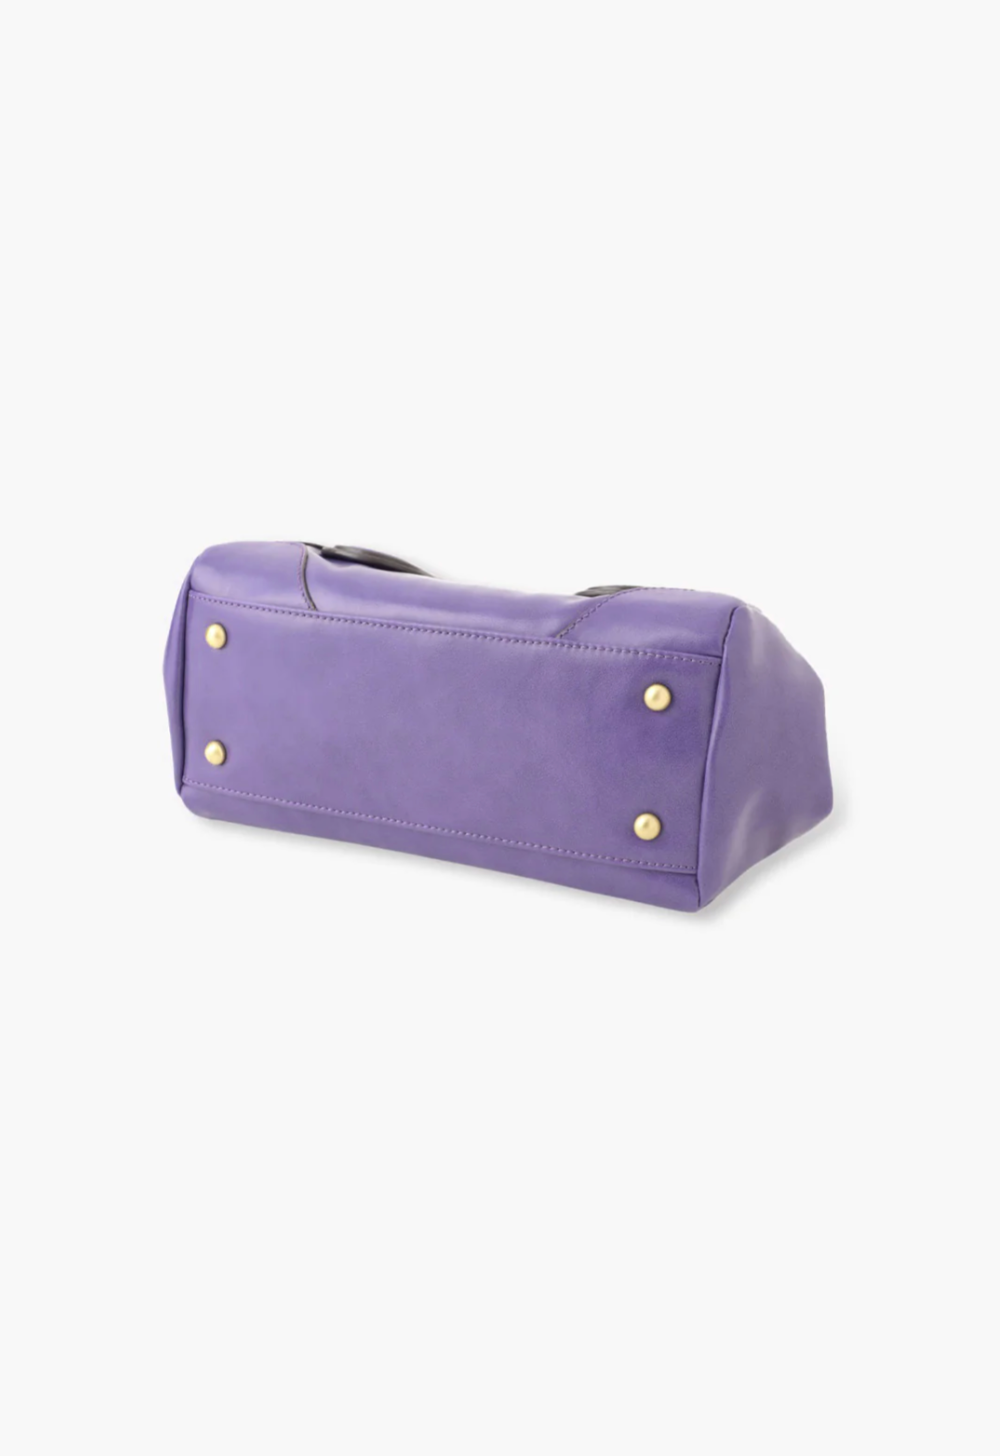 Purple Handbag, 4 rivets at the bottom to stabilize, black seams also highlight the edges